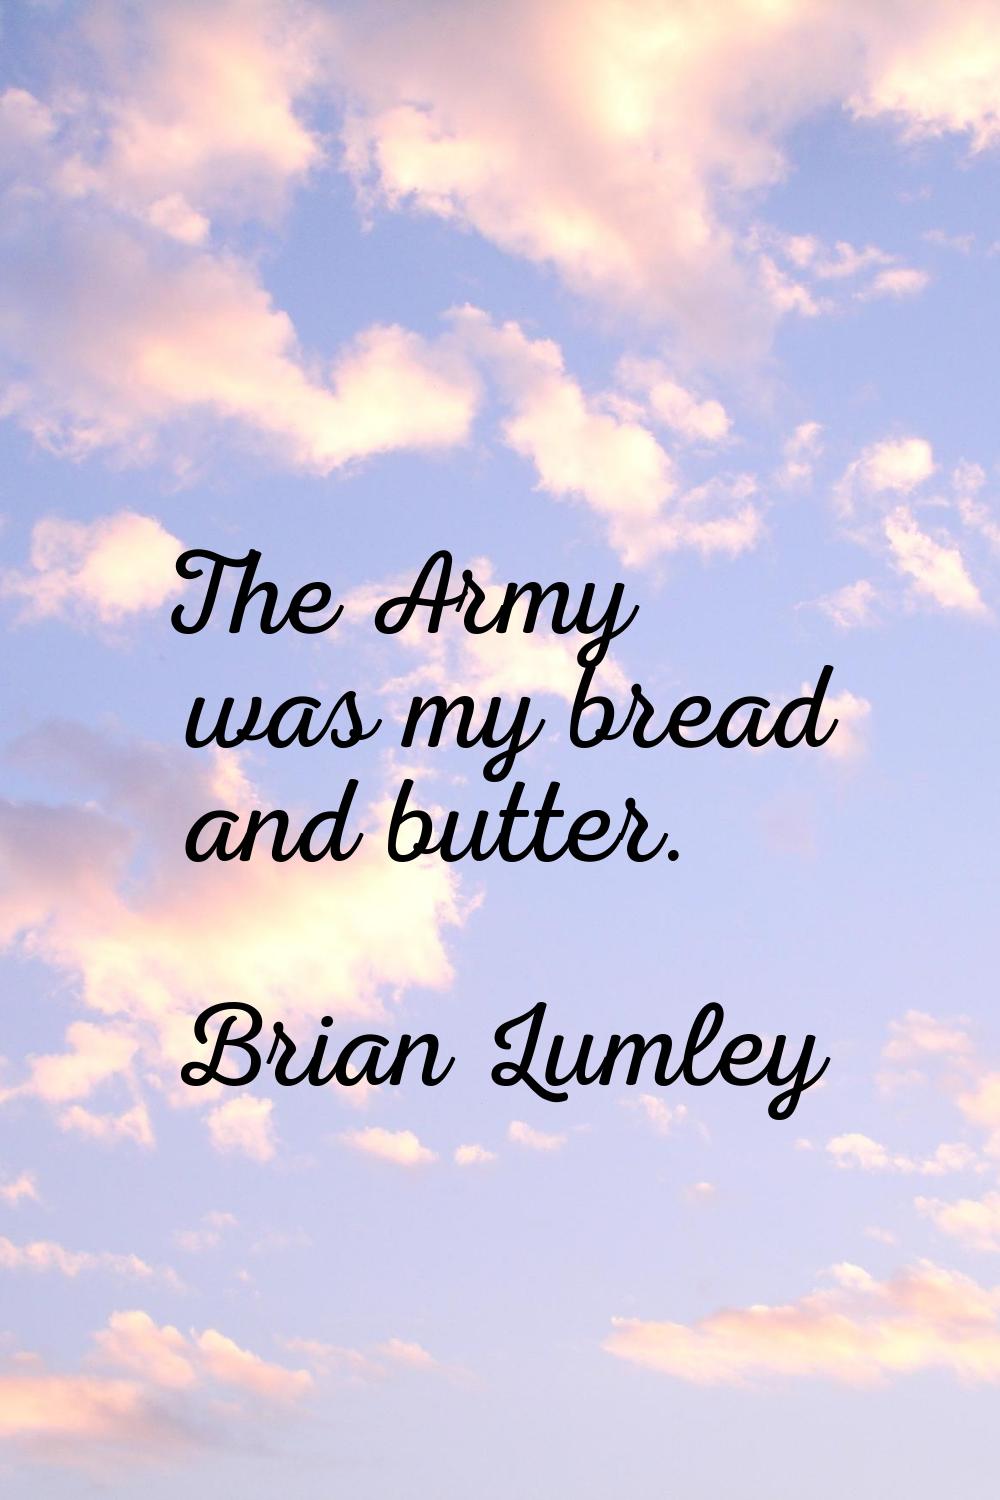 The Army was my bread and butter.